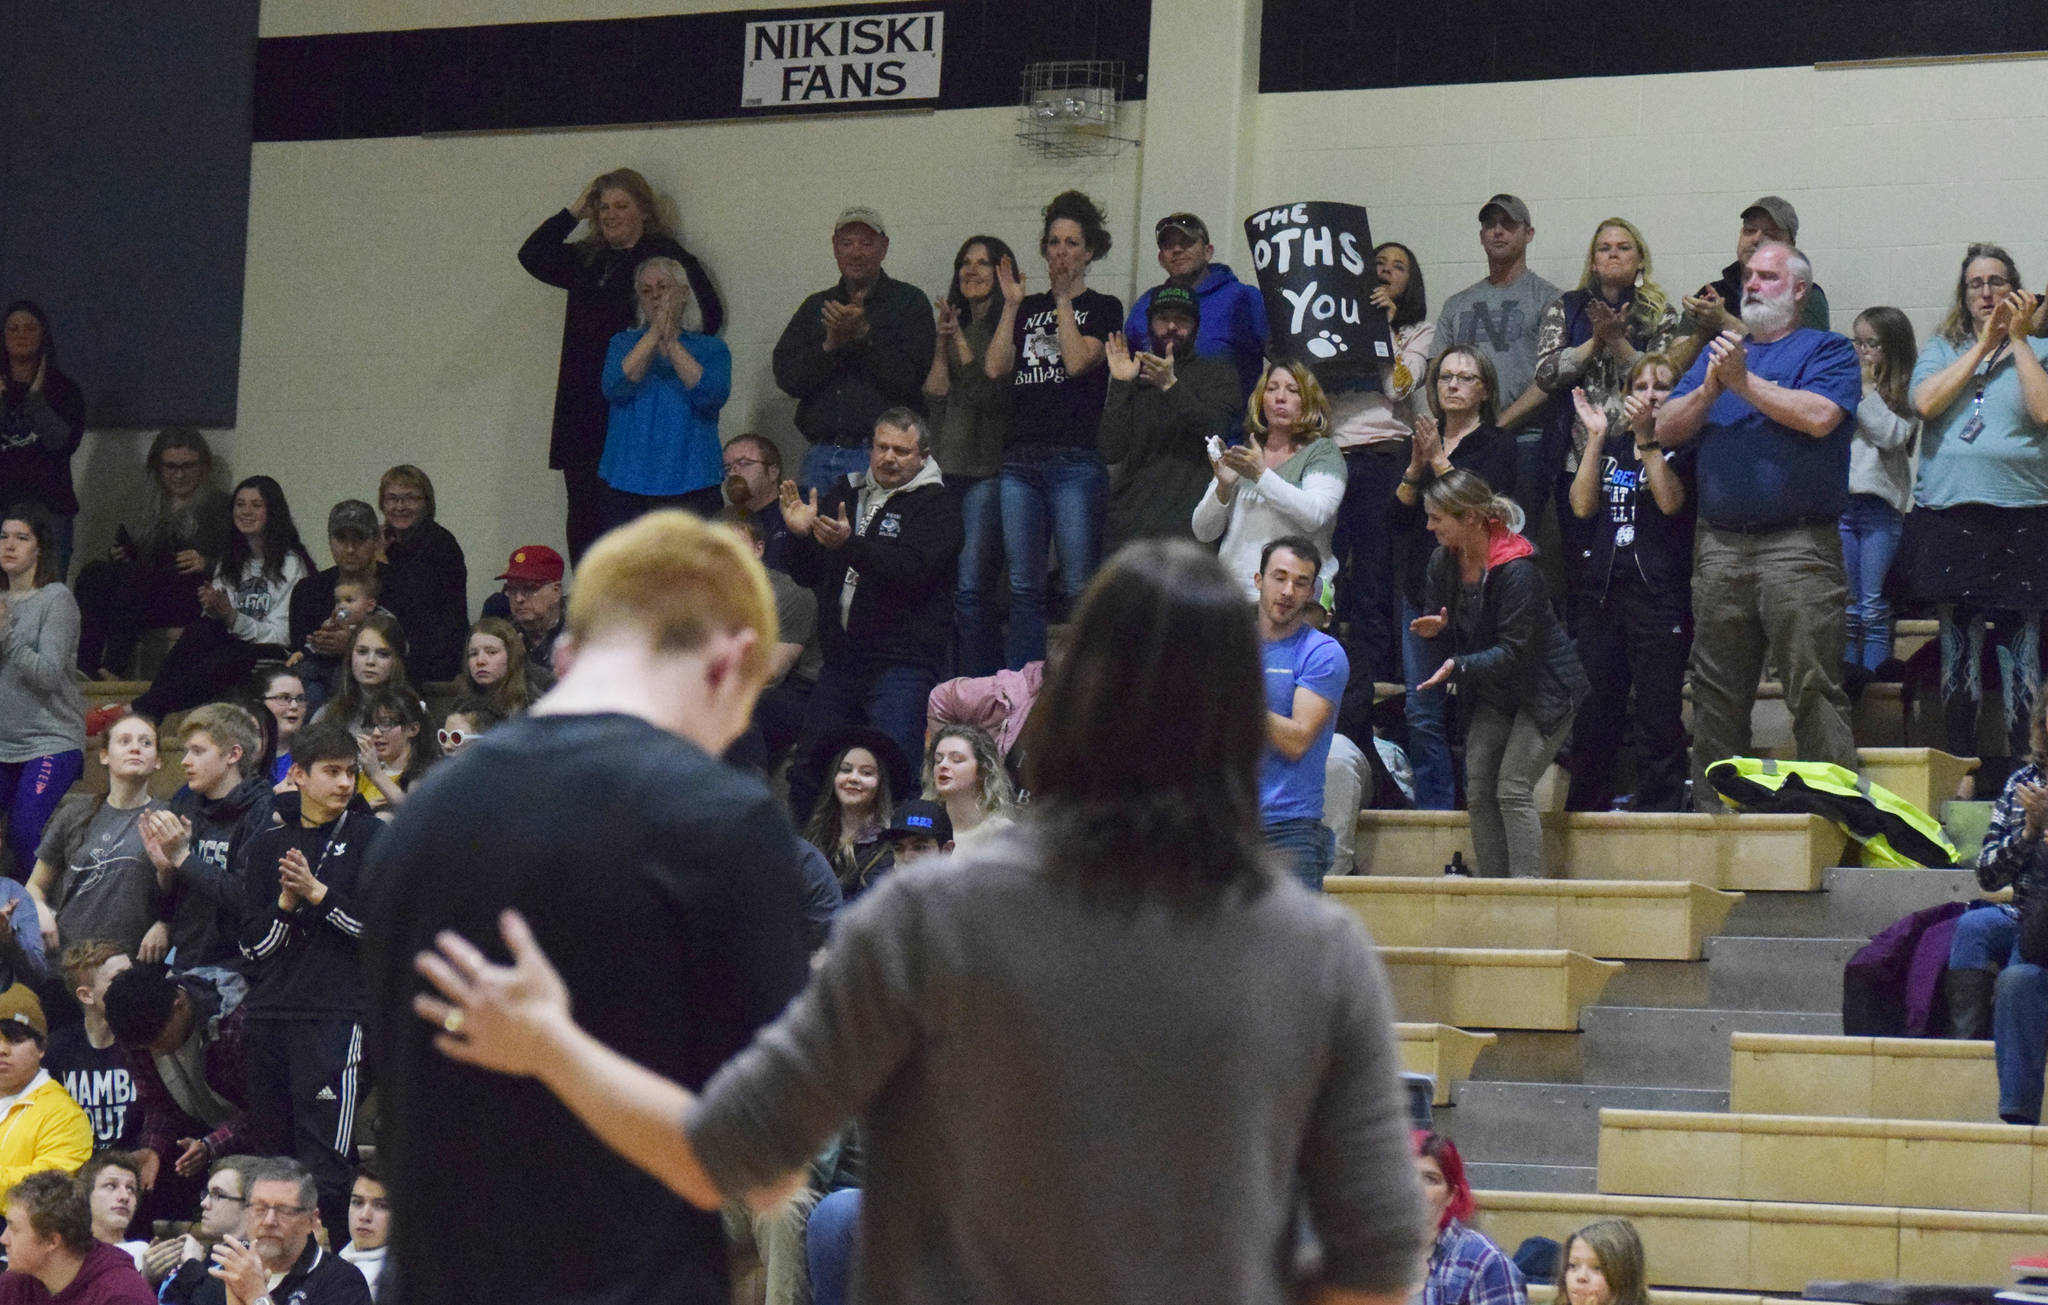 A crowd of Nikiski supporters give a standing ovation for the senior class Friday night at Nikiski High School. The evening also celebrated the memory of the late Rus Hitchcock, a longtime coaching presence in the Nikiski community who passed away in October 2017. (Photo by Joey Klecka/Peninsula Clarion)